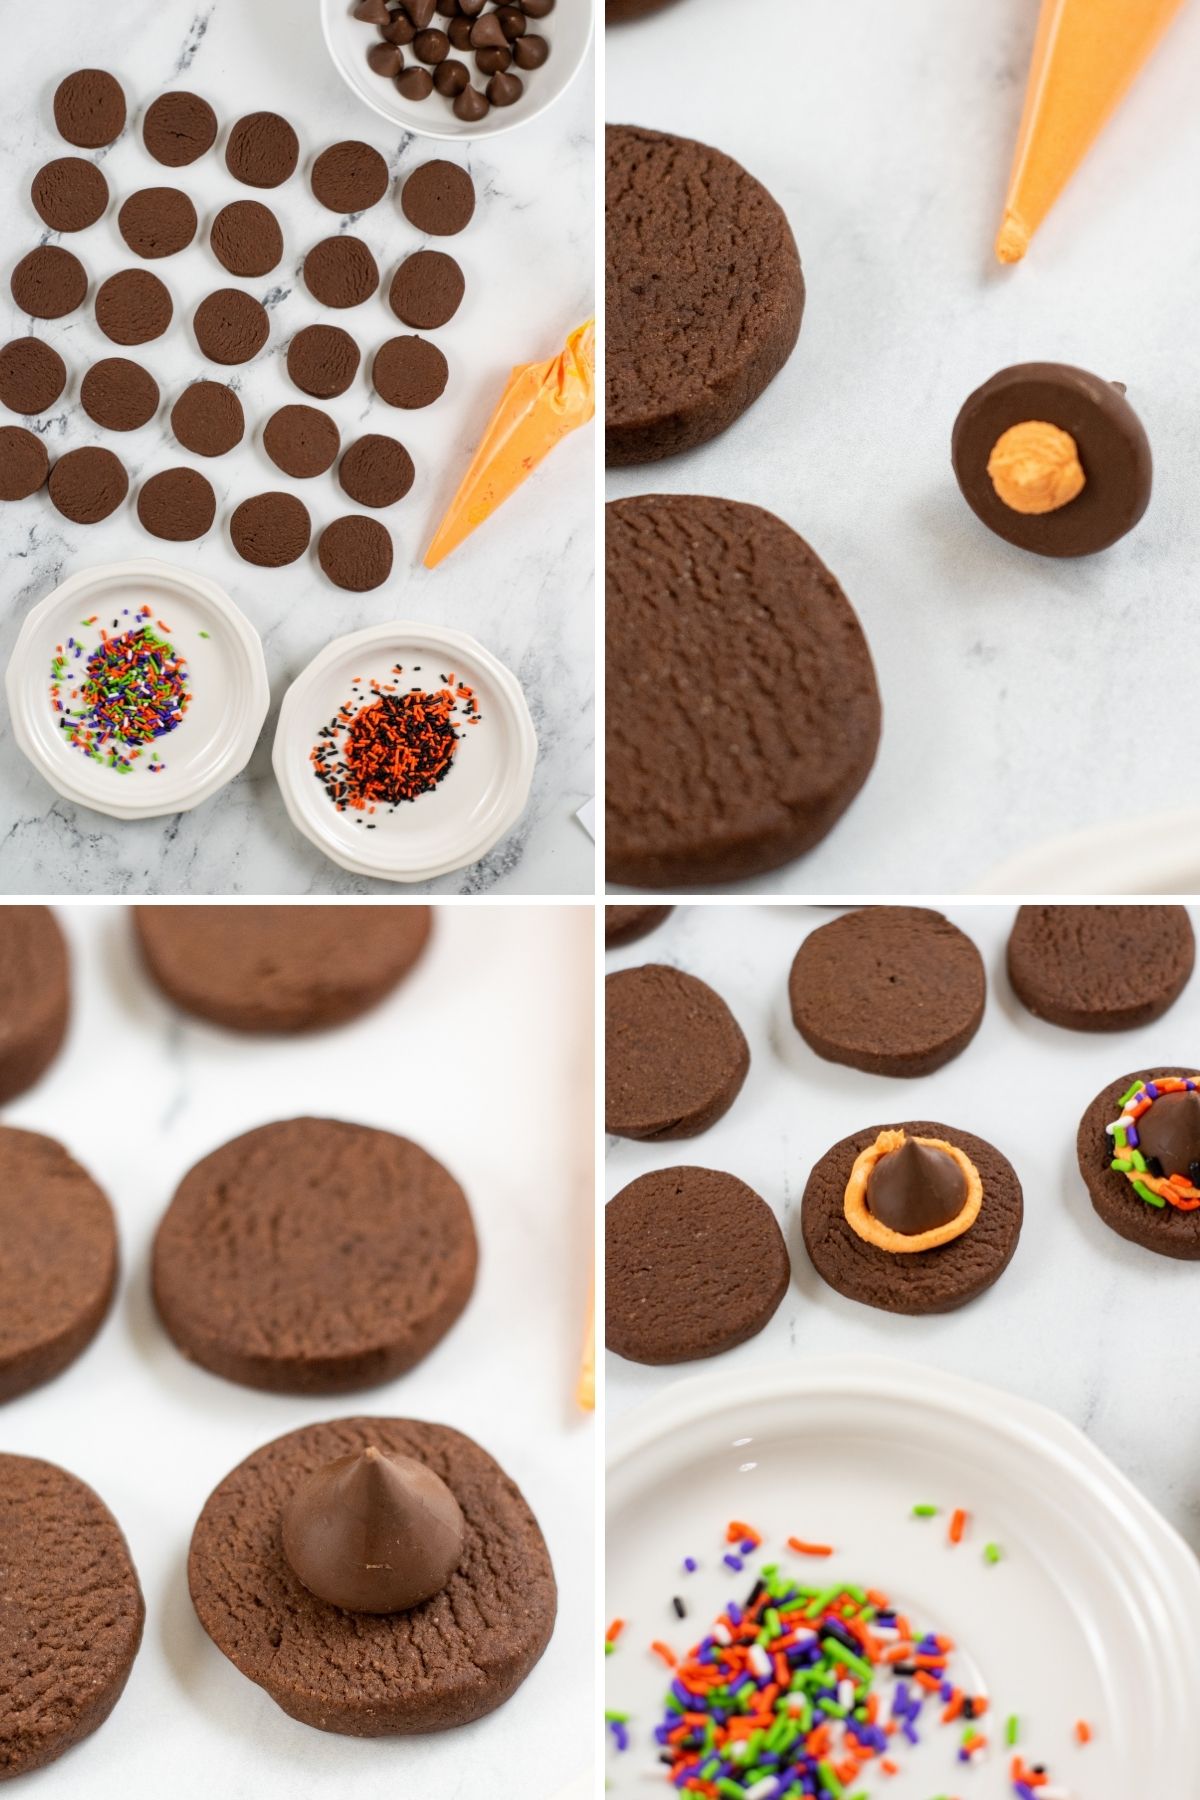 four photos: sliced baked cookies; dollop of orange frosting on bottom of Hershey's kiss, Hershey's kiss on top of chocolate cookie; orange frosting around Hershey's kiss and sprinkles